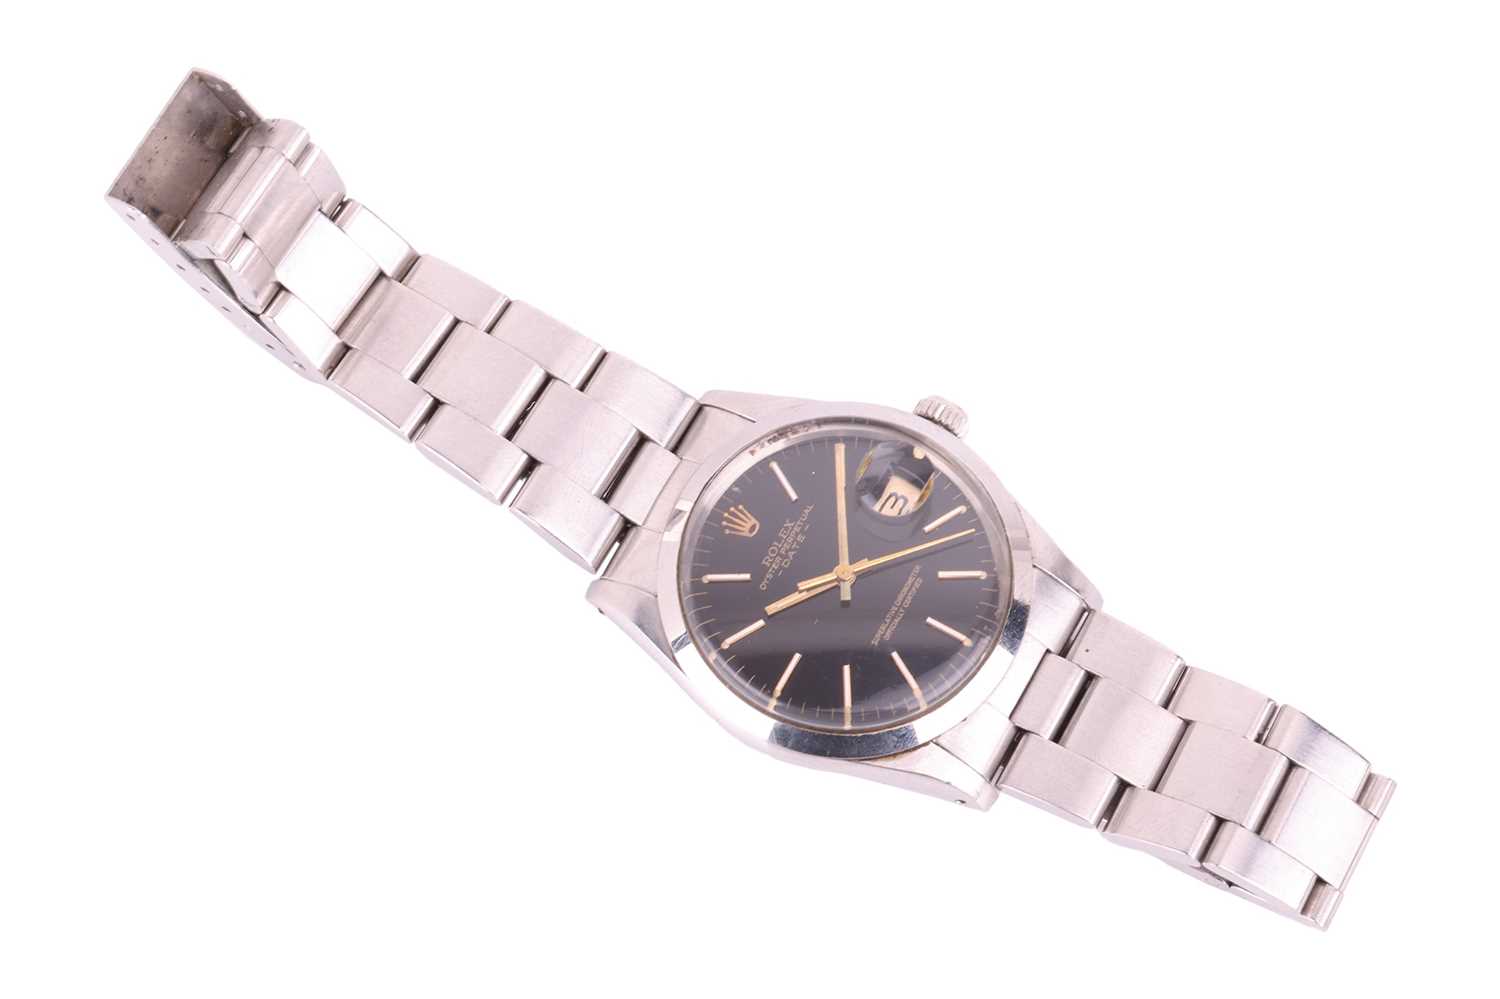 A Rolex Oyster Perpetual Date with black dial wristwatch Ref: 15000 Model: 15000 Serial: 7157952 Yea - Image 2 of 7